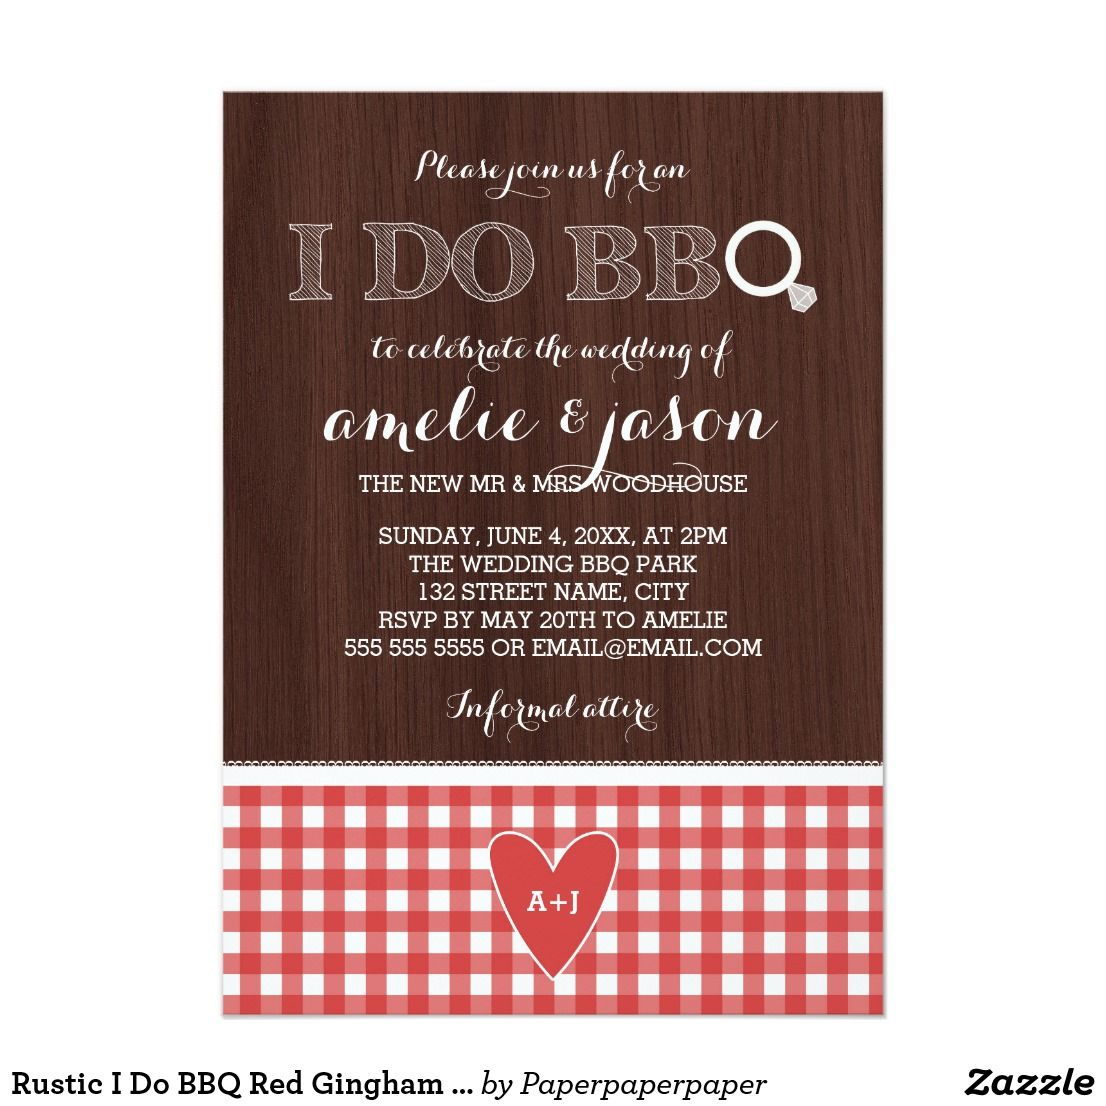 Rustic I Do Bbq Red Gingham Post Wedding Party Invitation Zazzle inside measurements 1106 X 1106